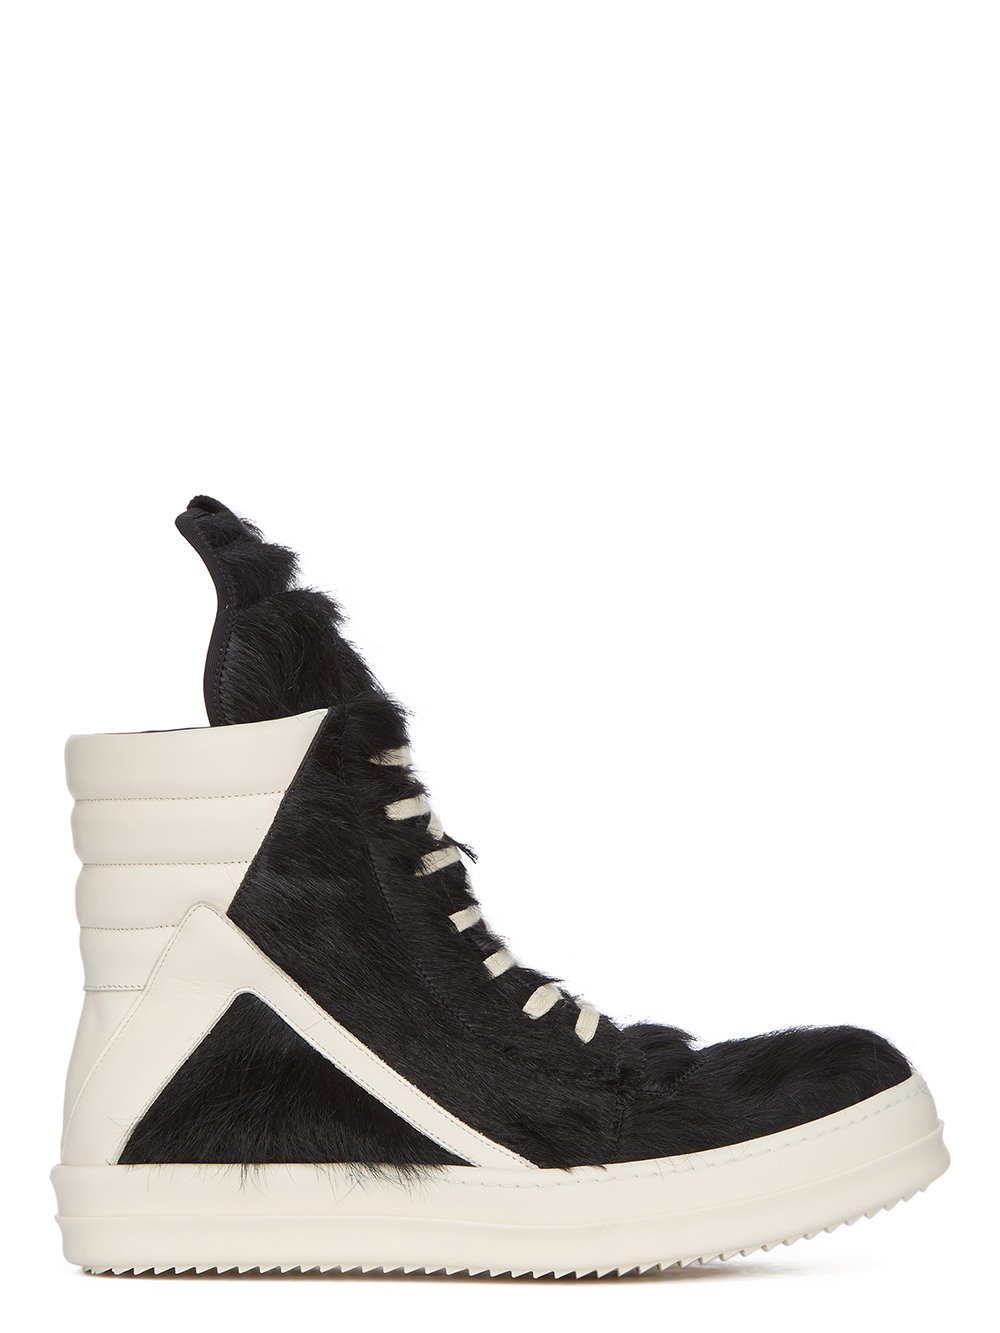 RICK OWENS FW23 LUXOR GEOBASKET IN BLACK AND MILK LONG HAIR PONY AND FULL GRAIN CALF LEATHER 